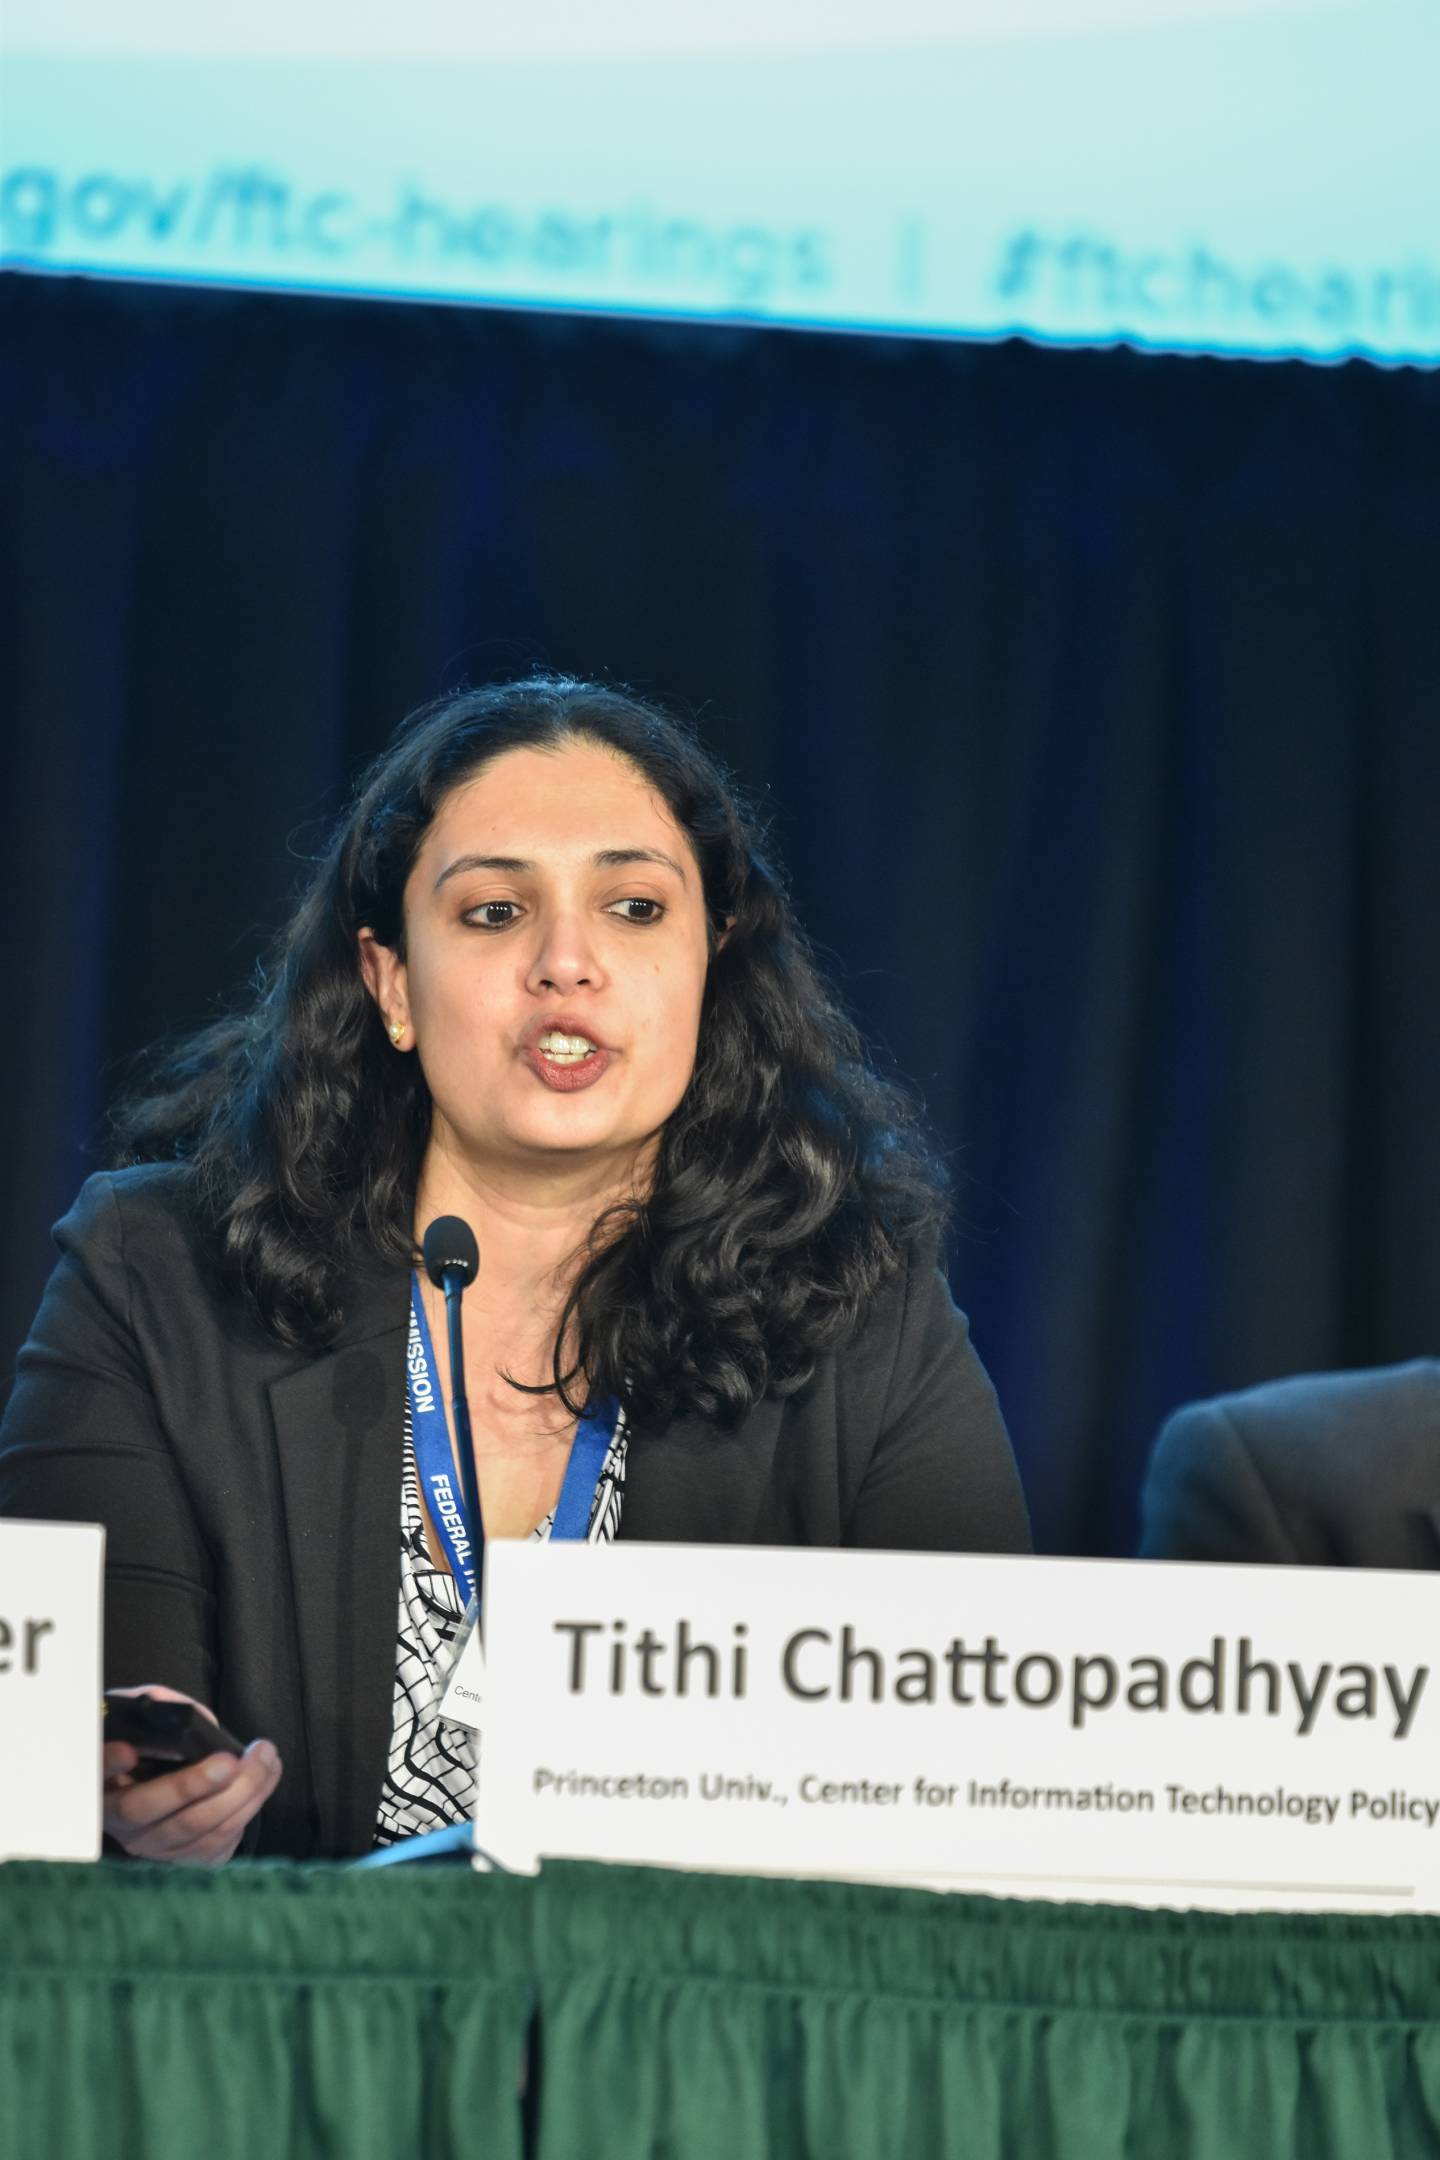 Tithi Chattopadhyay speaking on a panel